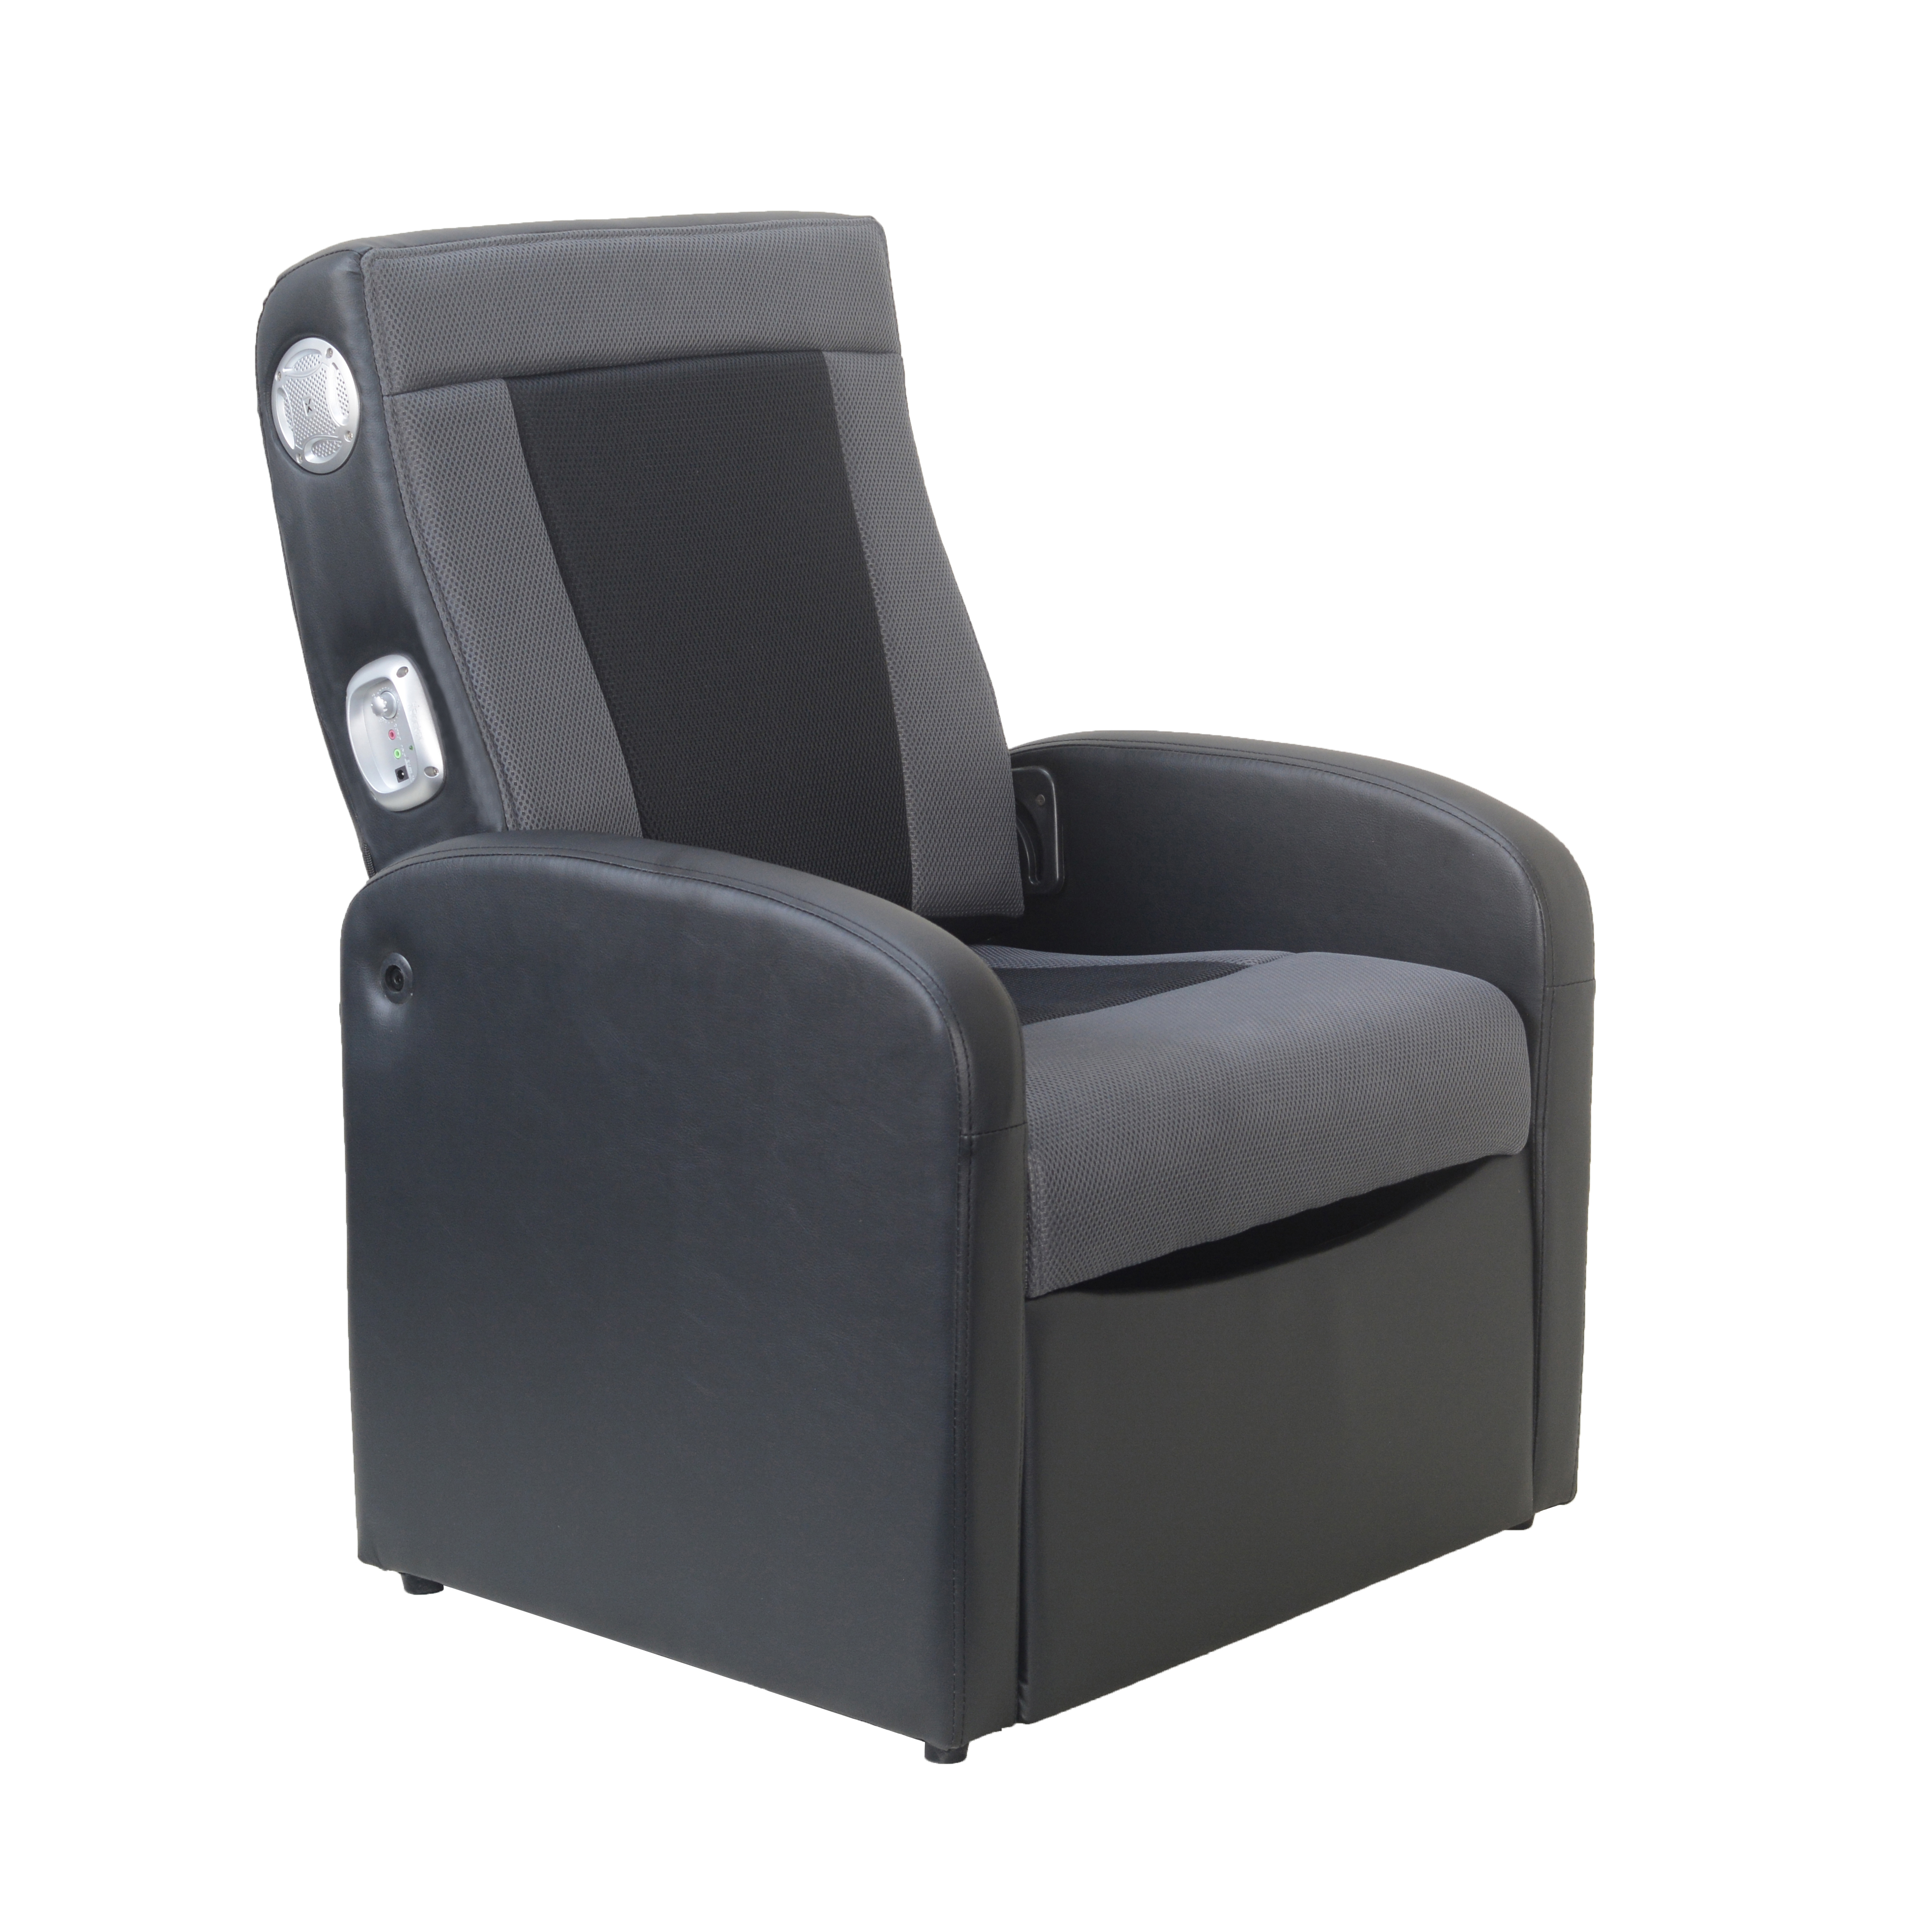 X Rocker 2.0 Flip Gaming Chair with Storage | Child and Teen | Black/Gray | 25.59 x 26.77 x 35.04 inches - image 1 of 6